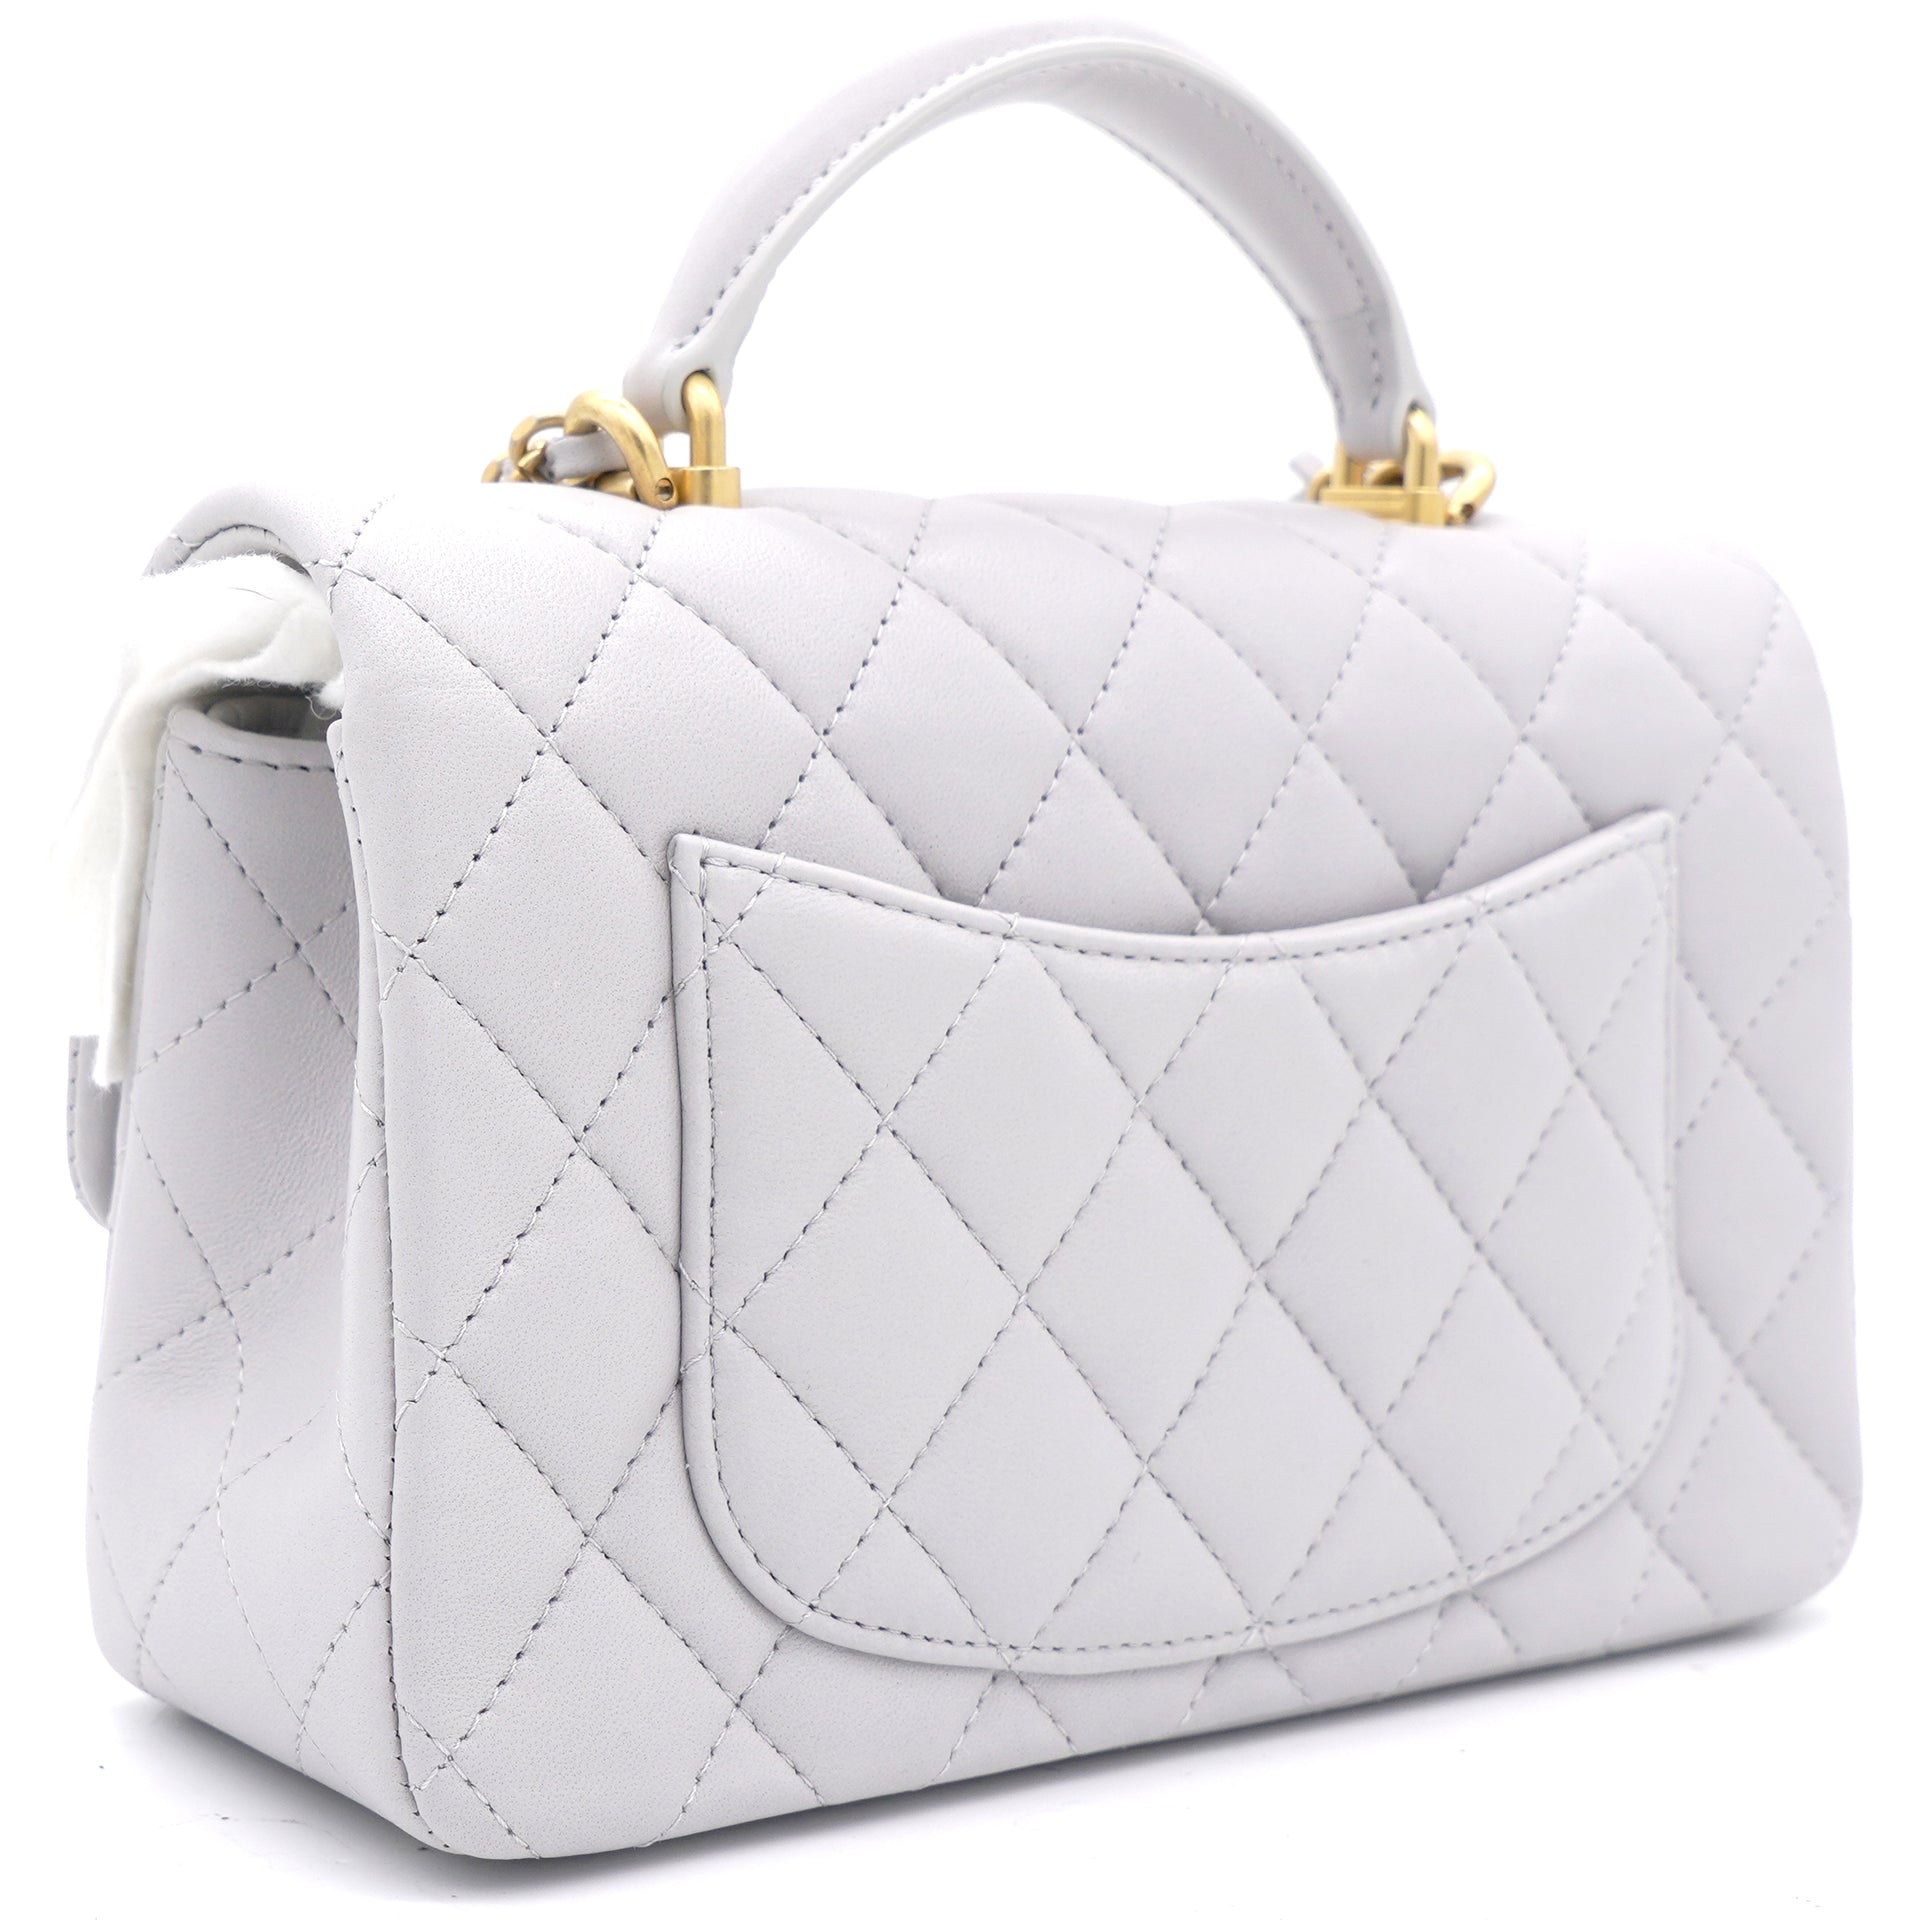 CHANEL MINI FLAP BAG WITH TOP HANDLE, SILVER